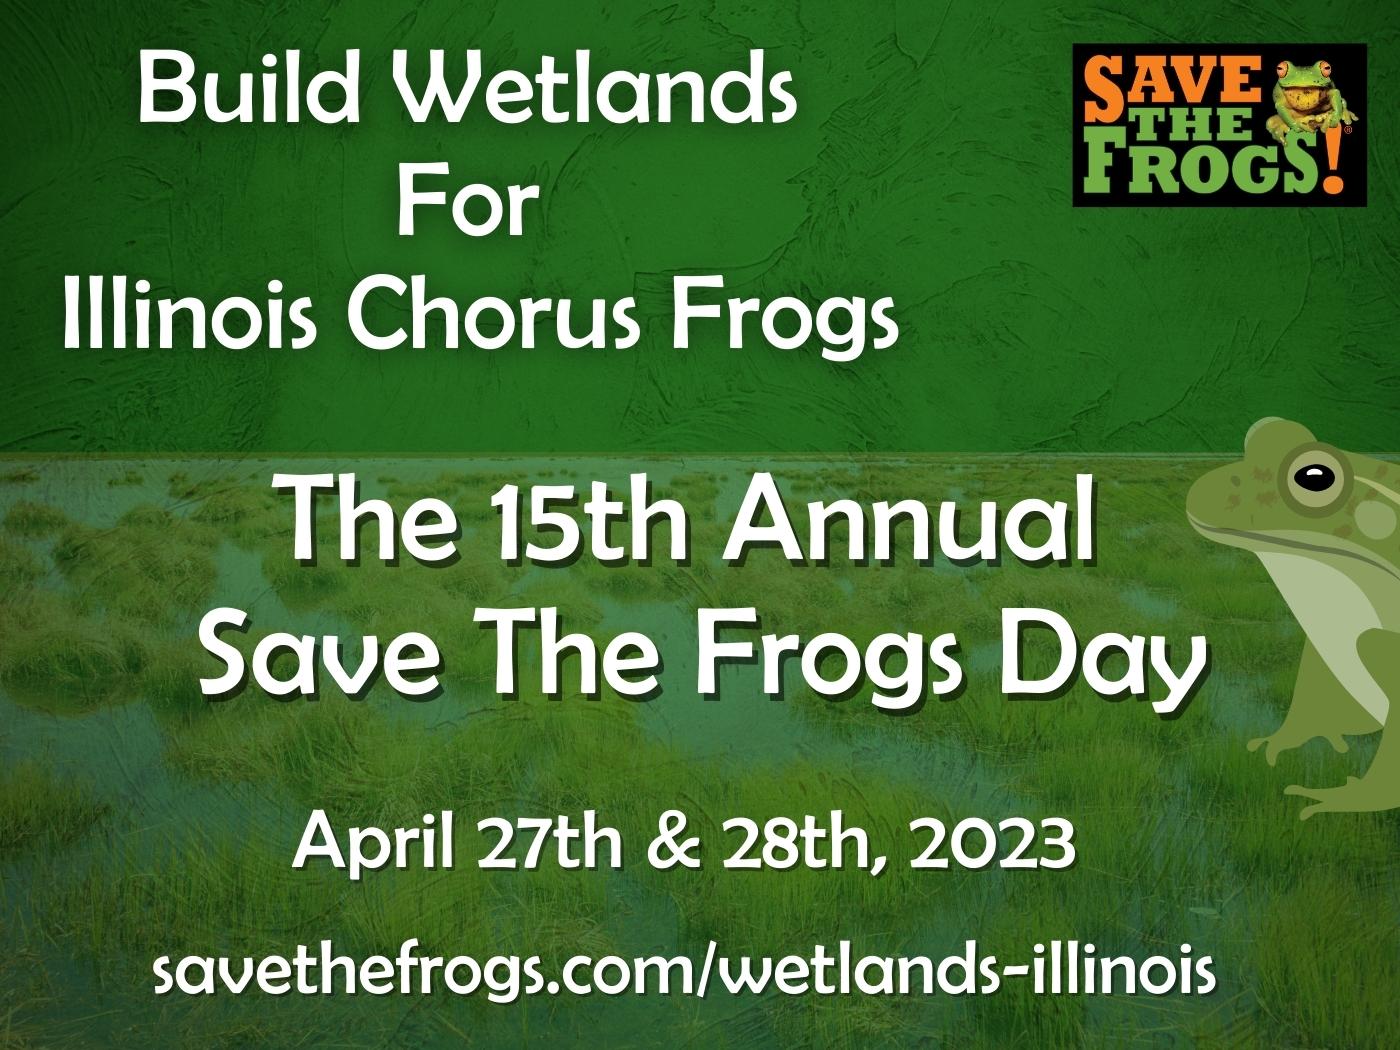 Build Wetlands For Illinois Chorus Frogs